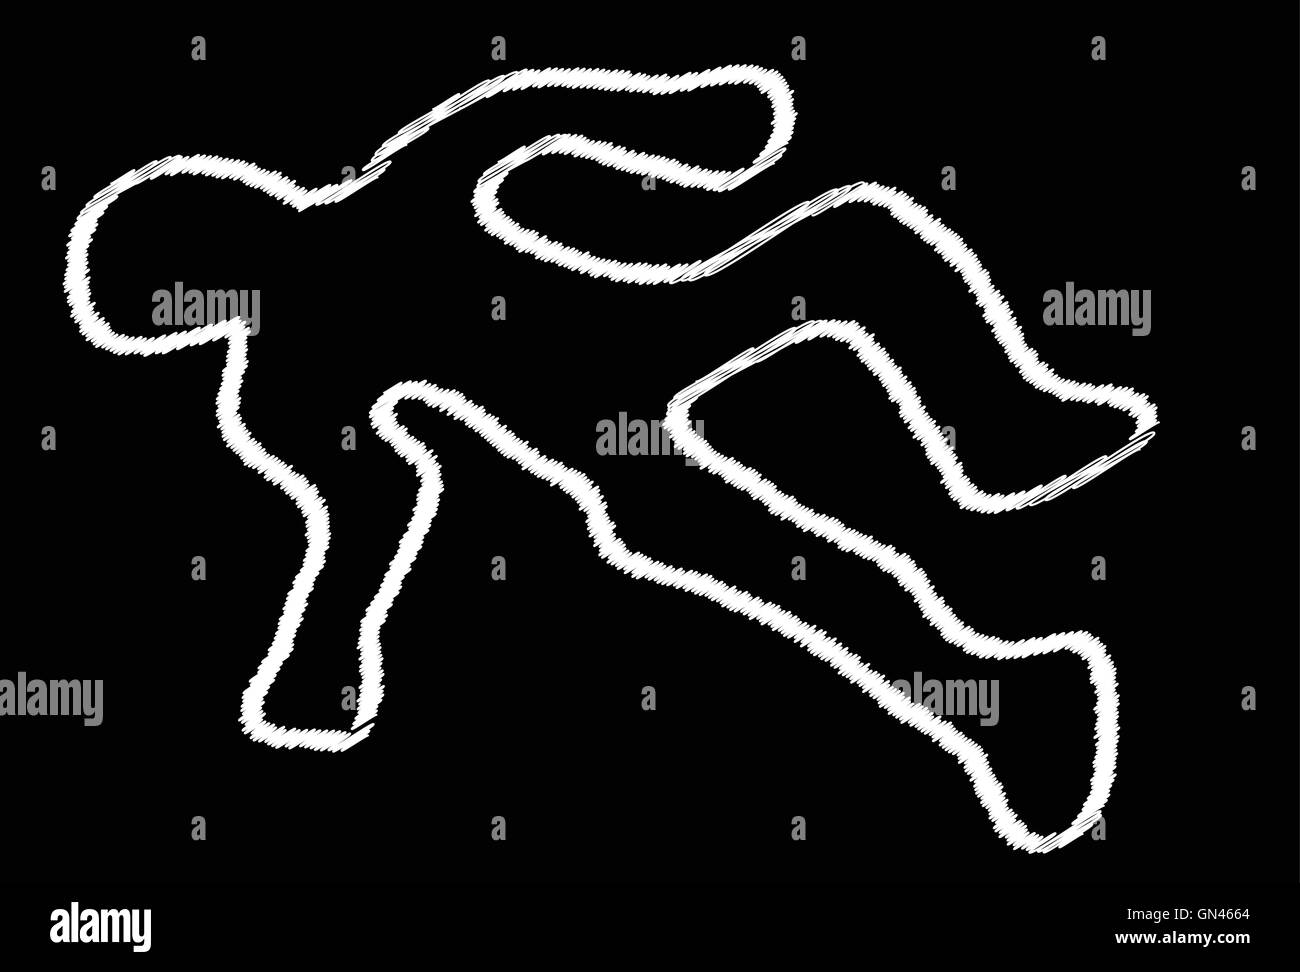 Chalk outline body Stock Vector Images - Alamy